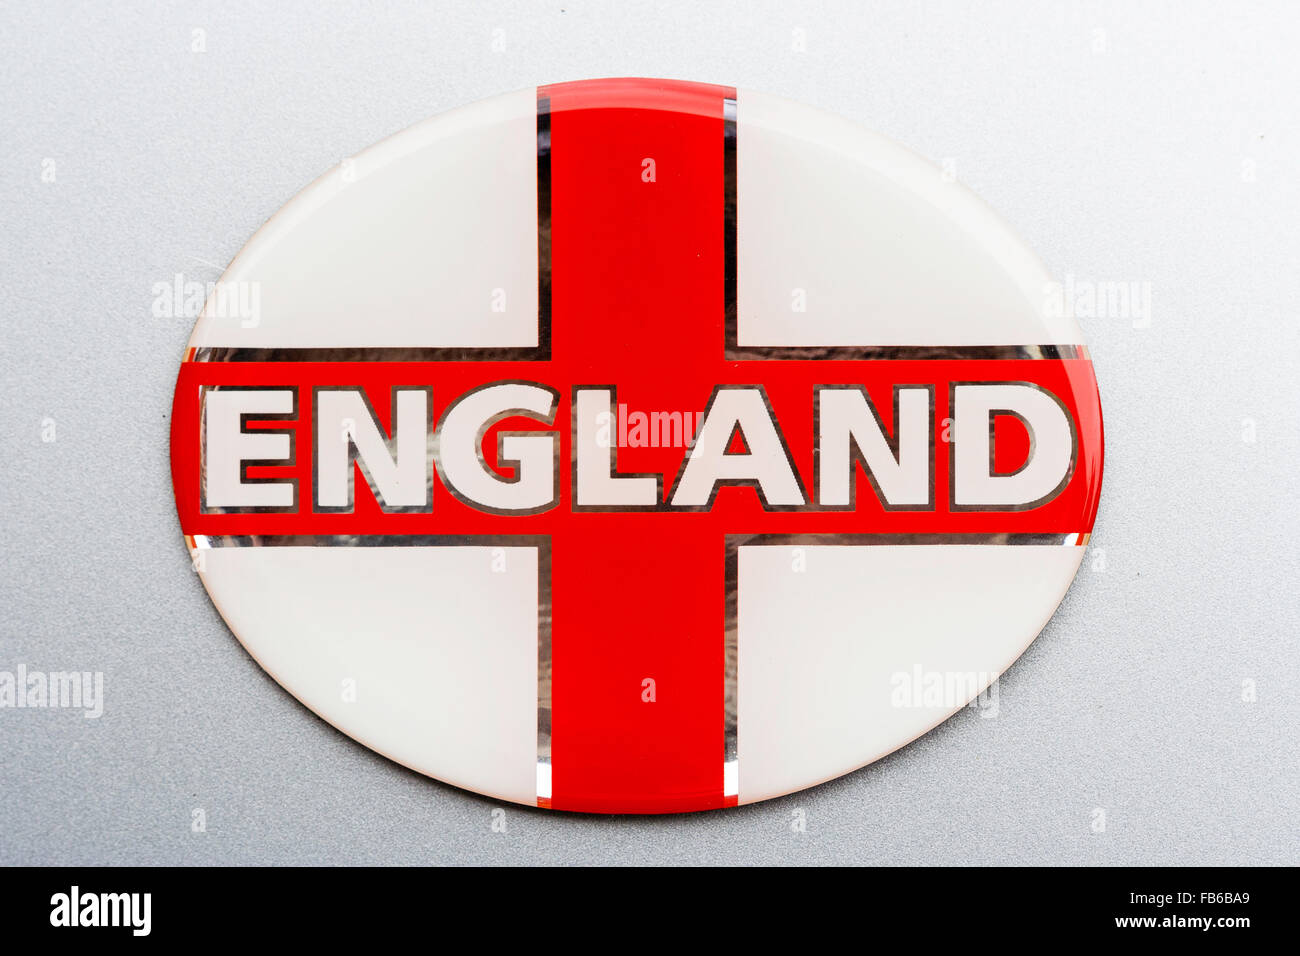 White badge with English flag, (St George), red cross, and the word England across it. Against plain white background. Stock Photo